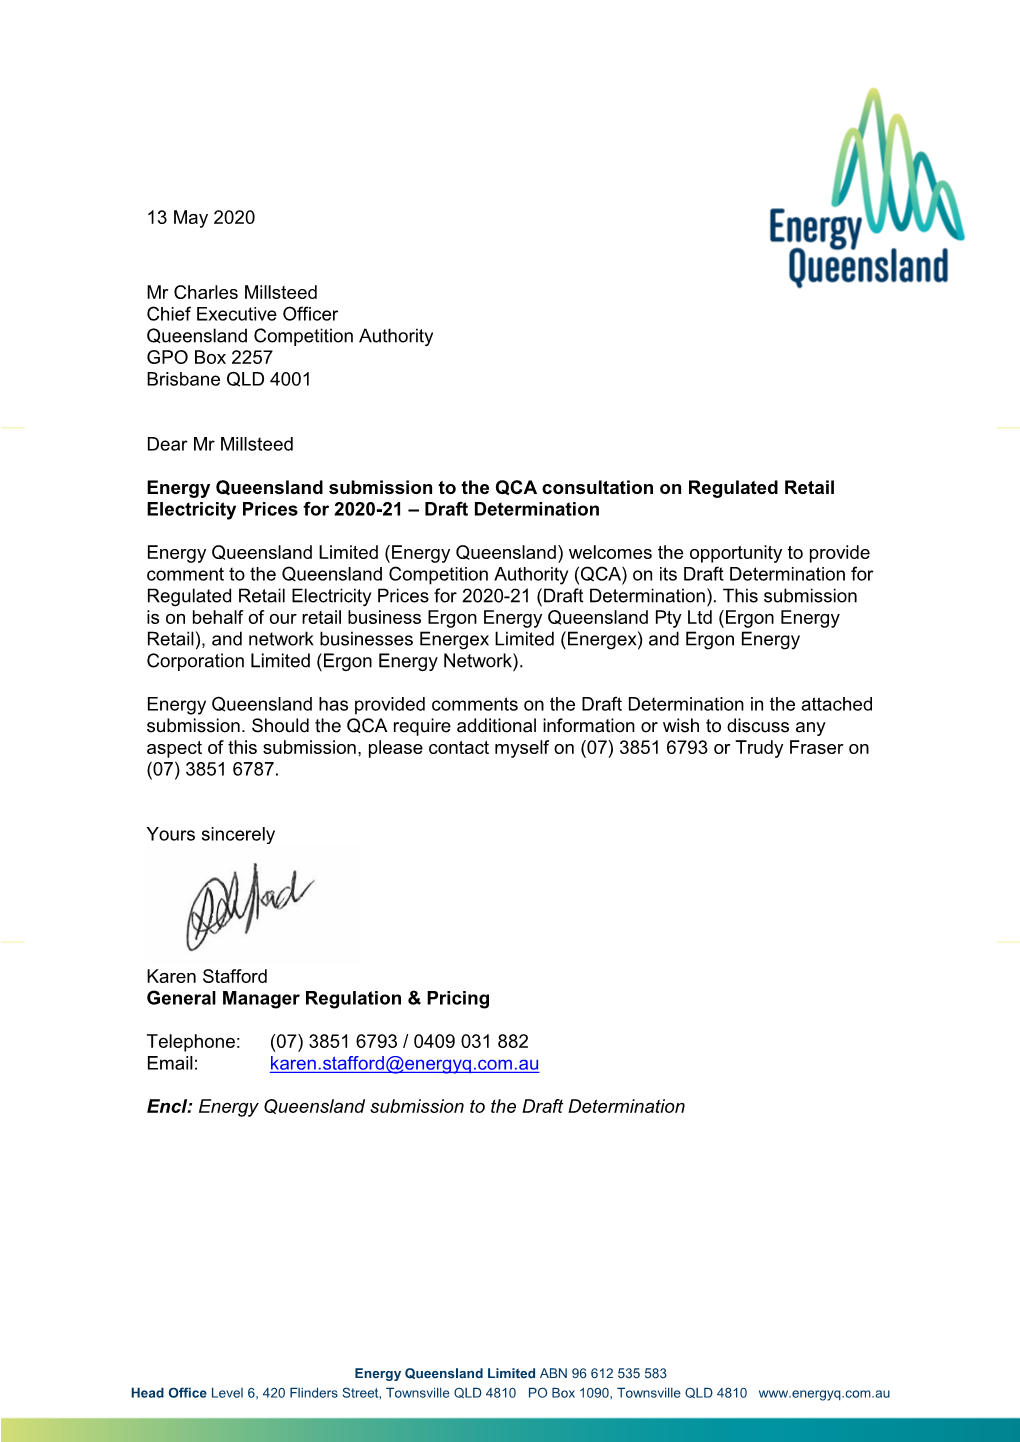 Energy Queensland Submission to the QCA Consultation on Regulated Retail Electricity Prices for 2020-21 – Draft Determination